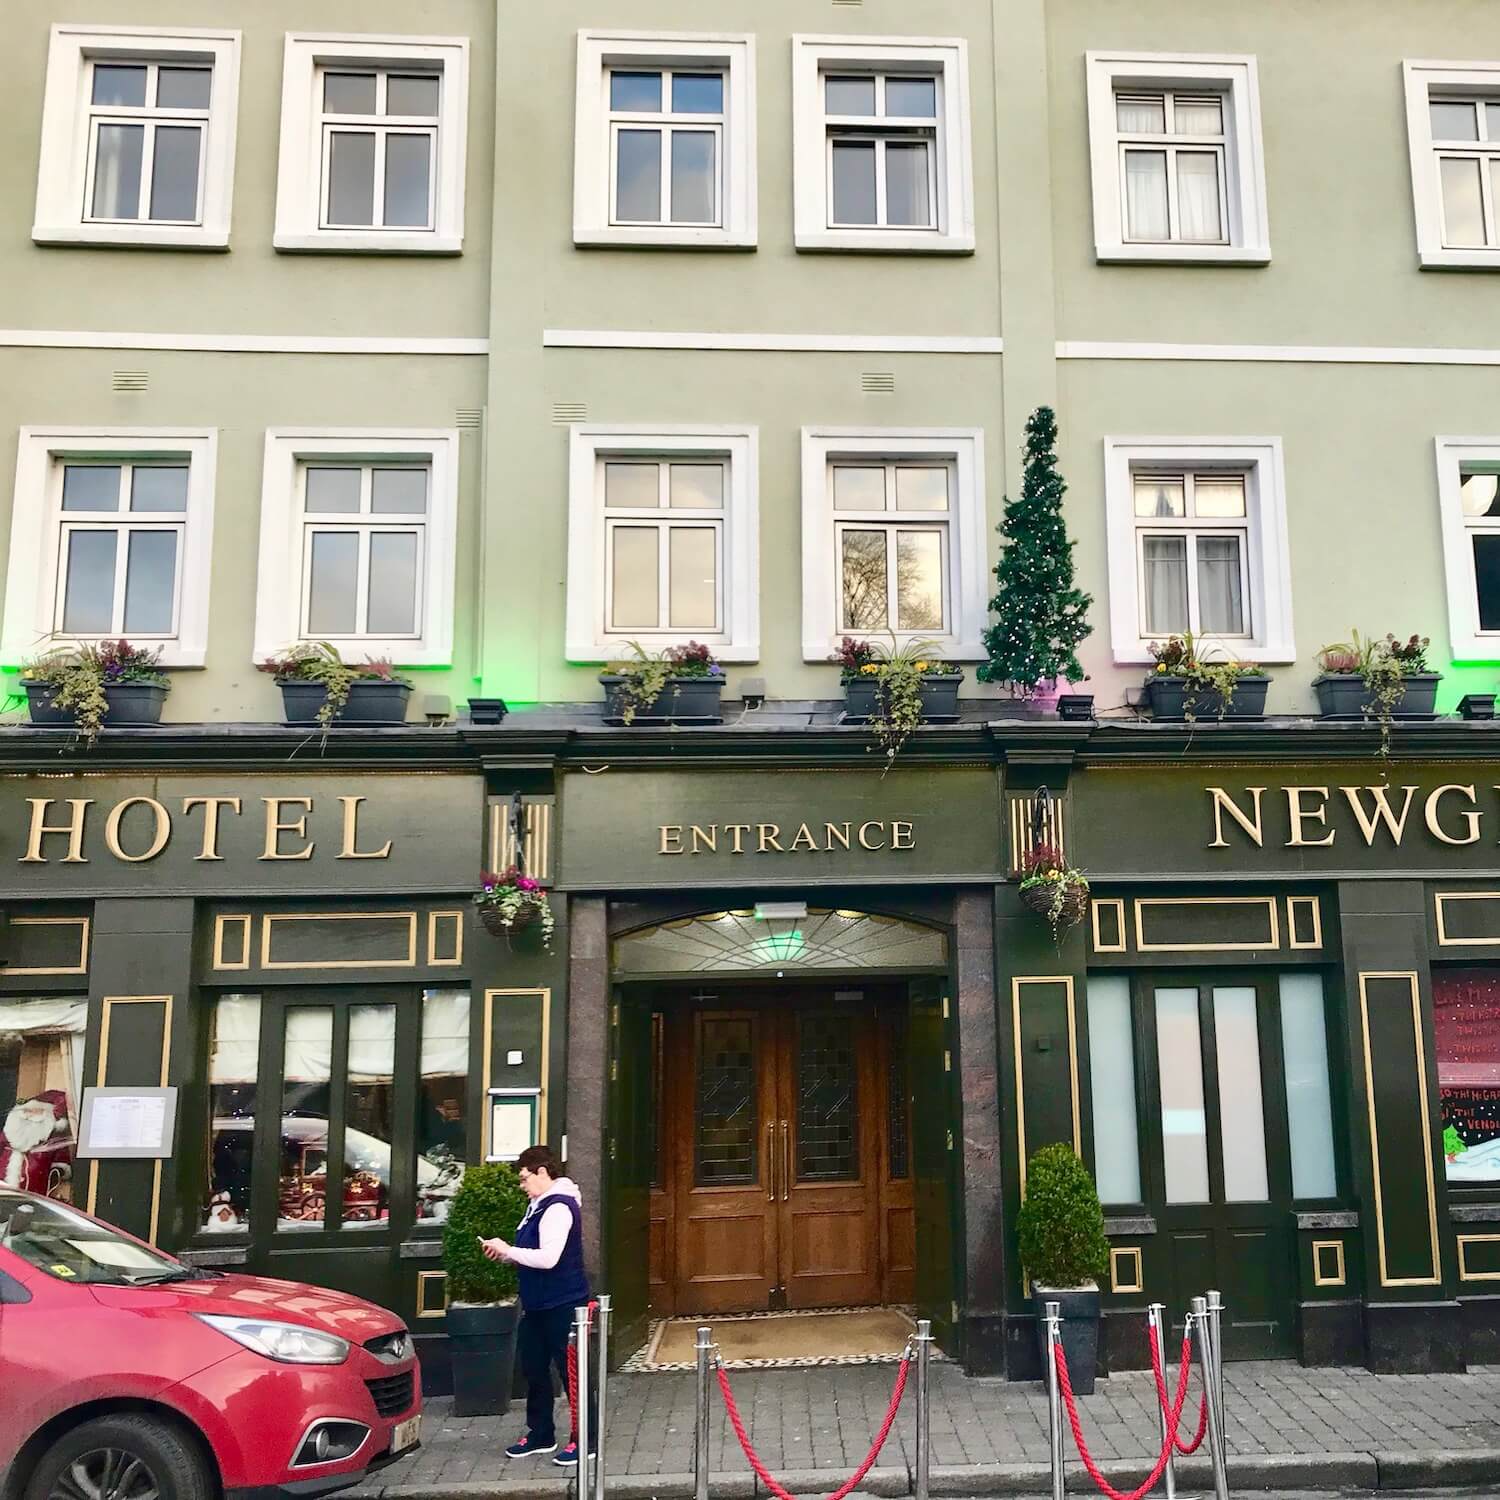 The Newgrange Hotel is painted two deep shades of green and centrally located in downtown Navan, Ireland.